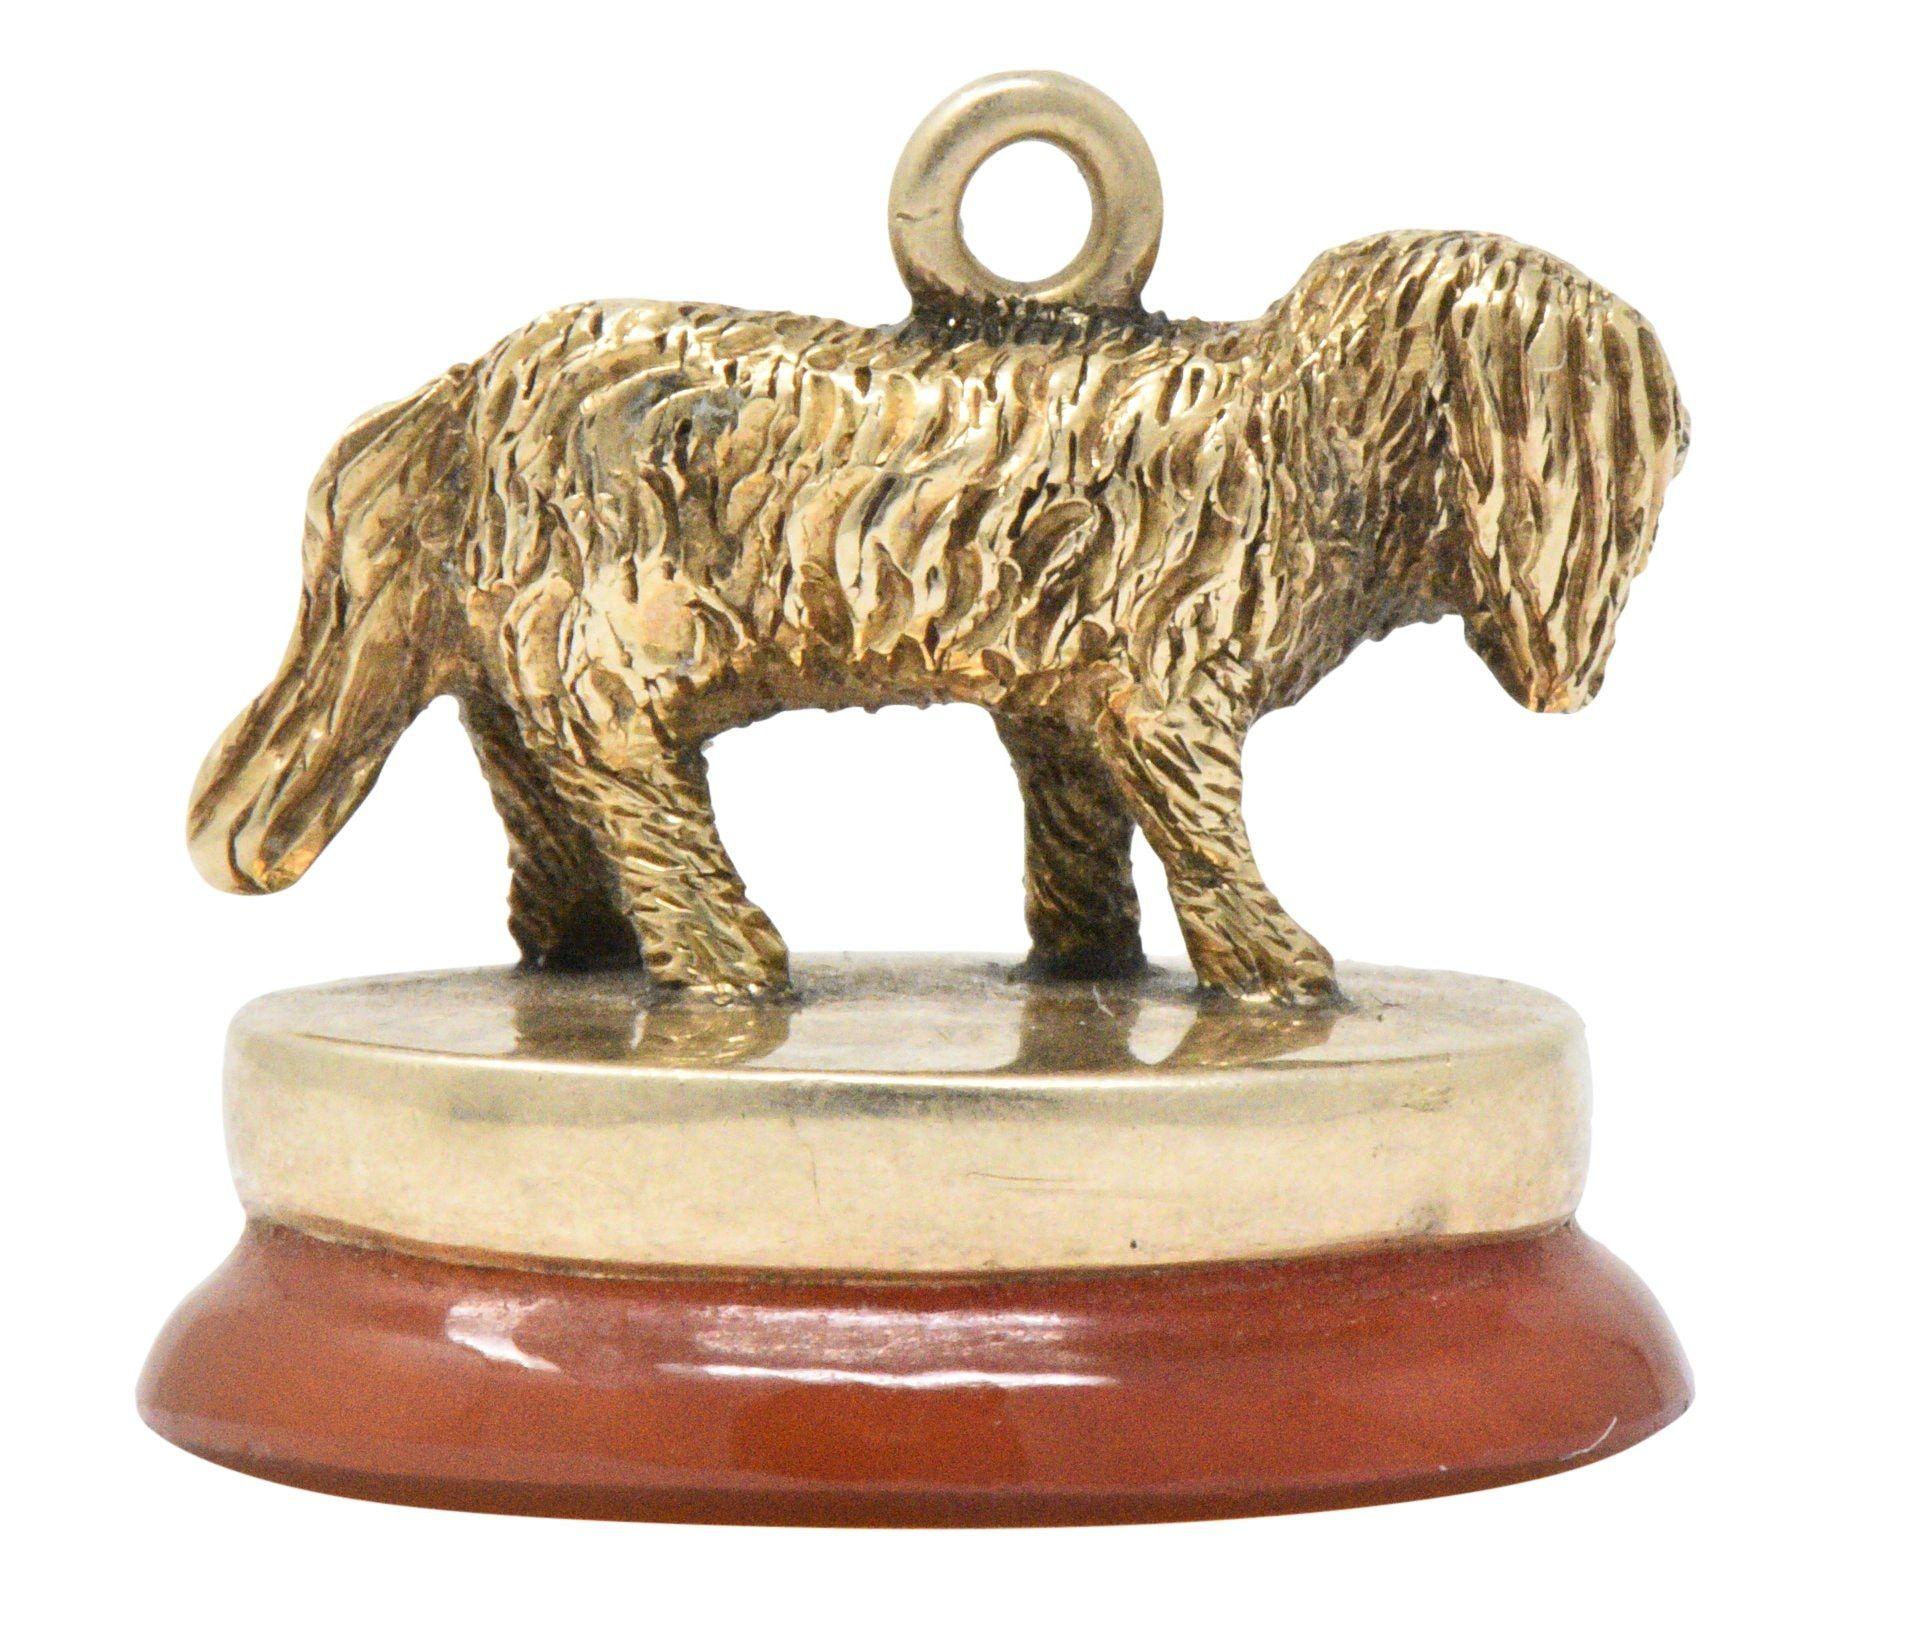 Fob style charm featuring a highly rendered shaggy dog figure with extremely textured fur

Perched upon an oval carnelian base, polished, and a deep orangey-red color

Tested as 14 karat gold

Circa: 1880s

Length: 3/4 inch

Height: 1/2 inch

Total